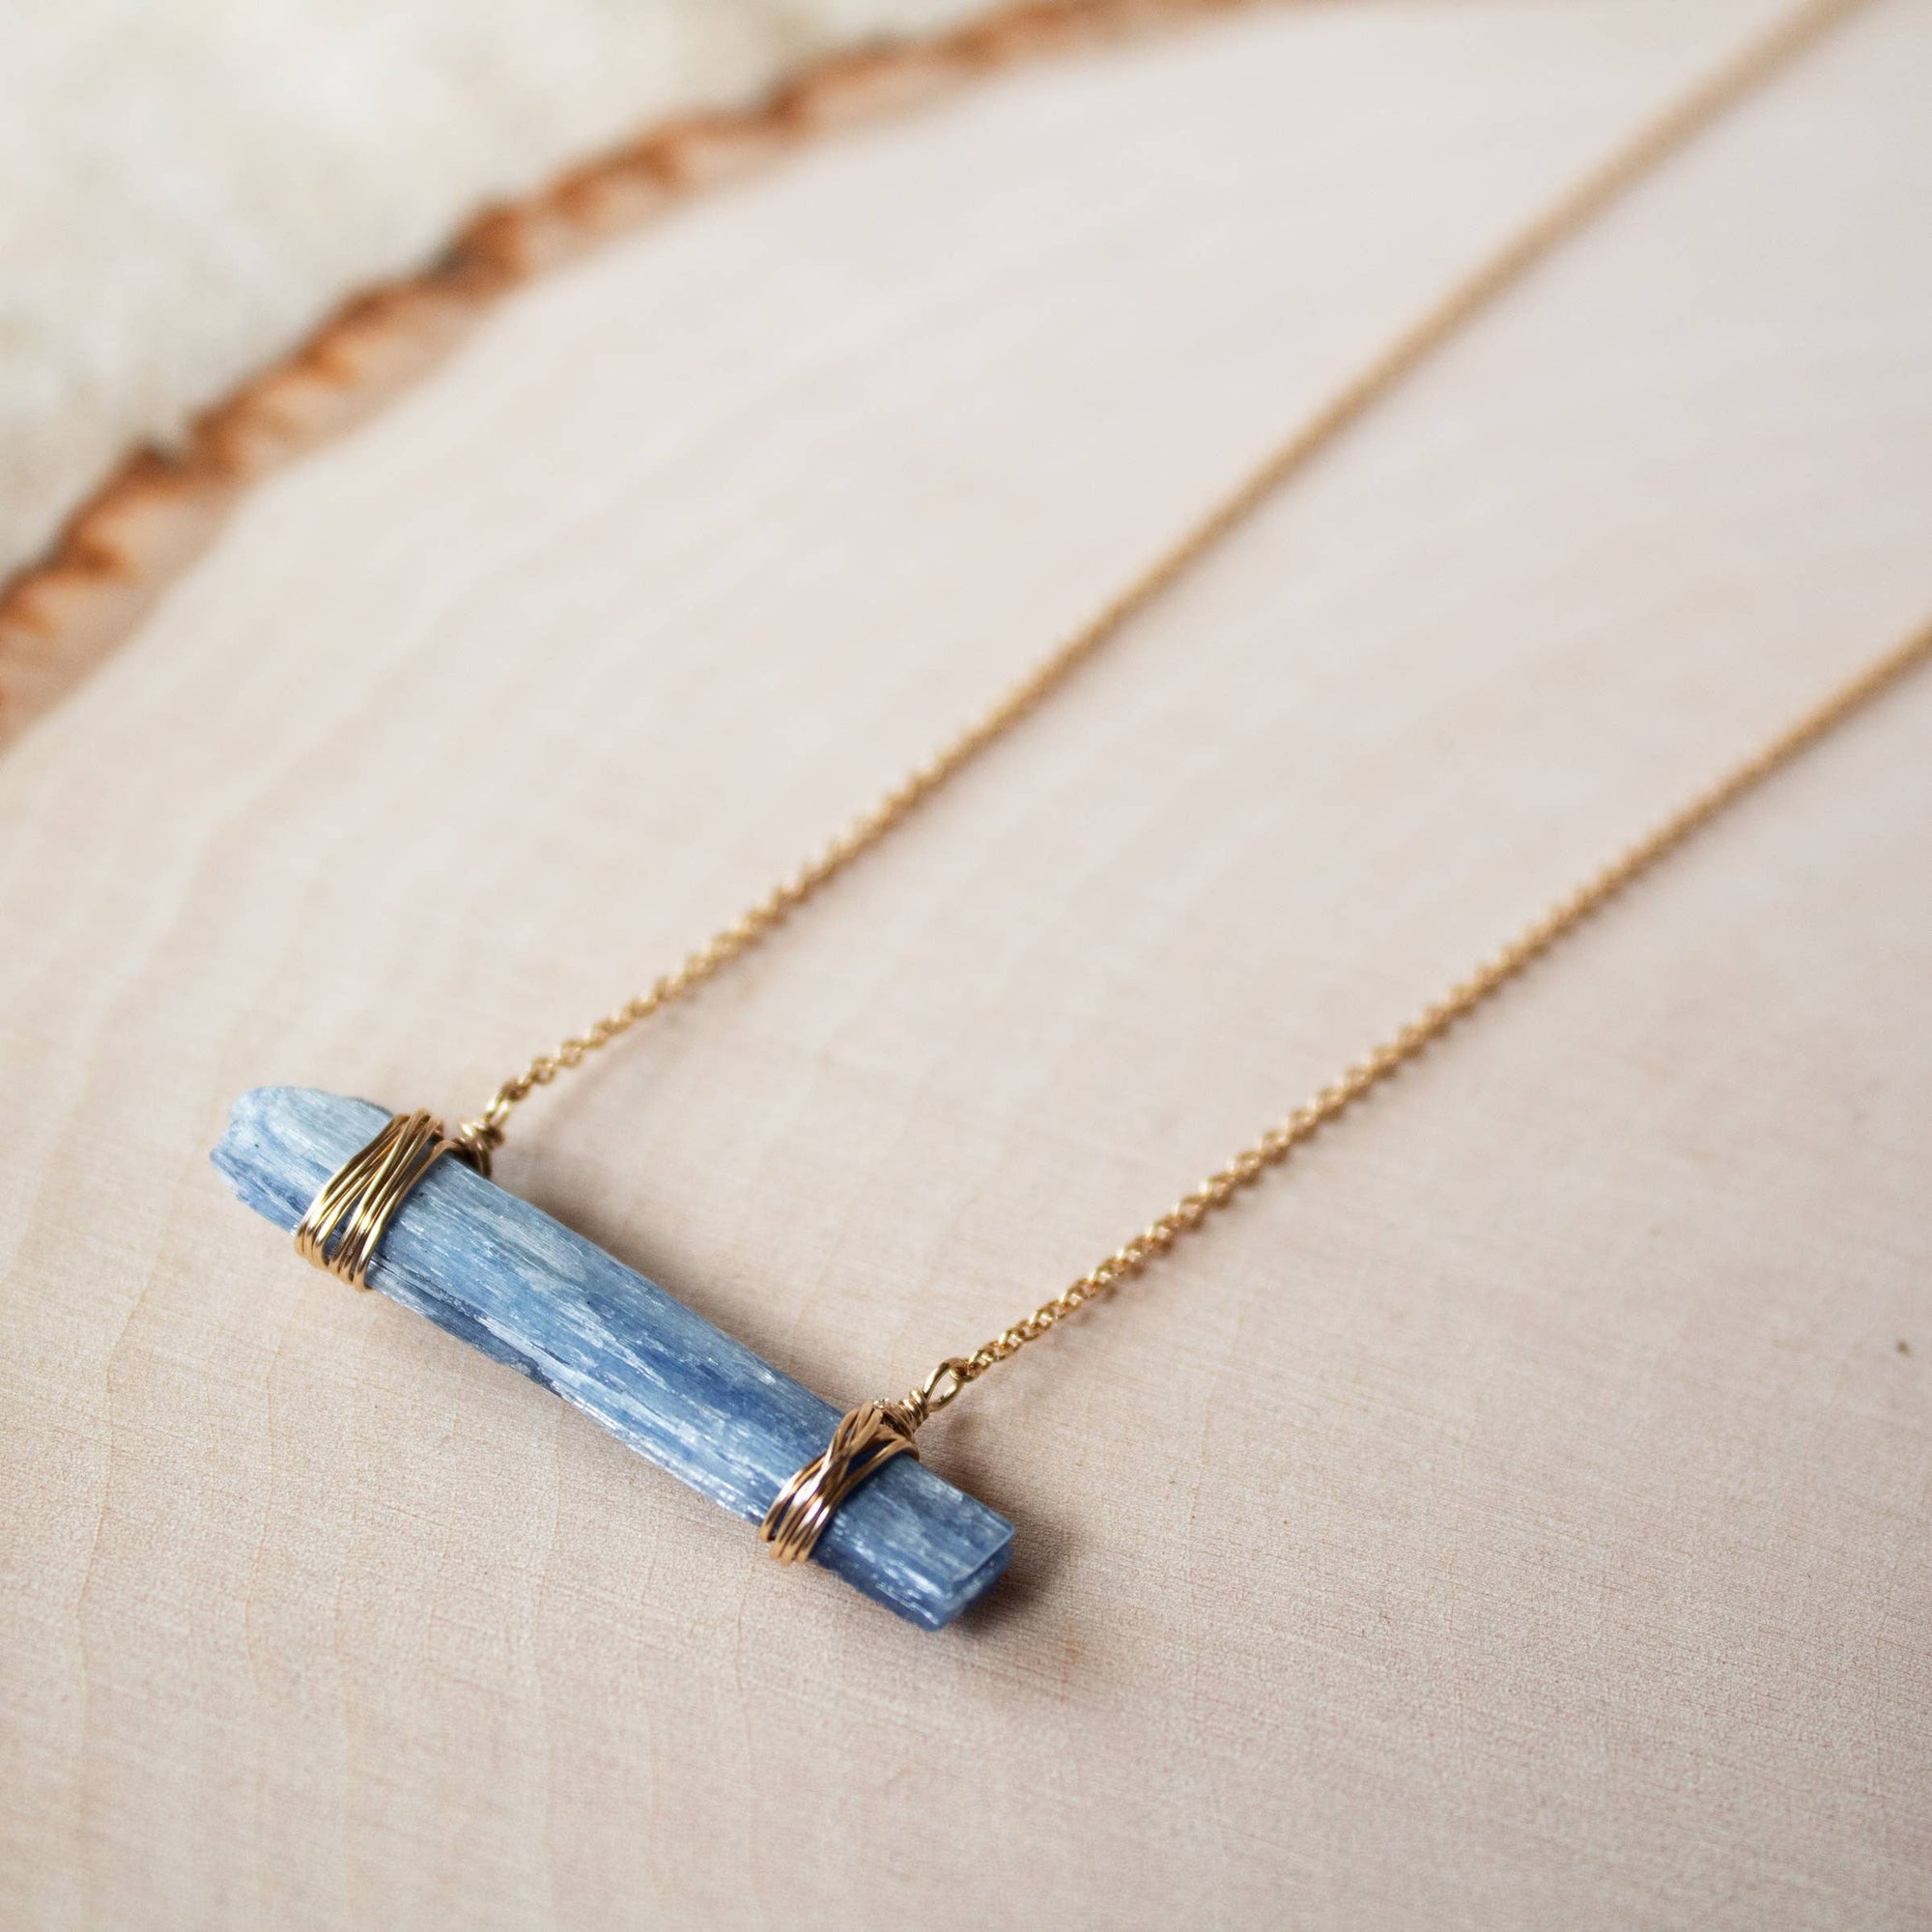 Blue Kyanite Scales 14k Gold Filled Necklace